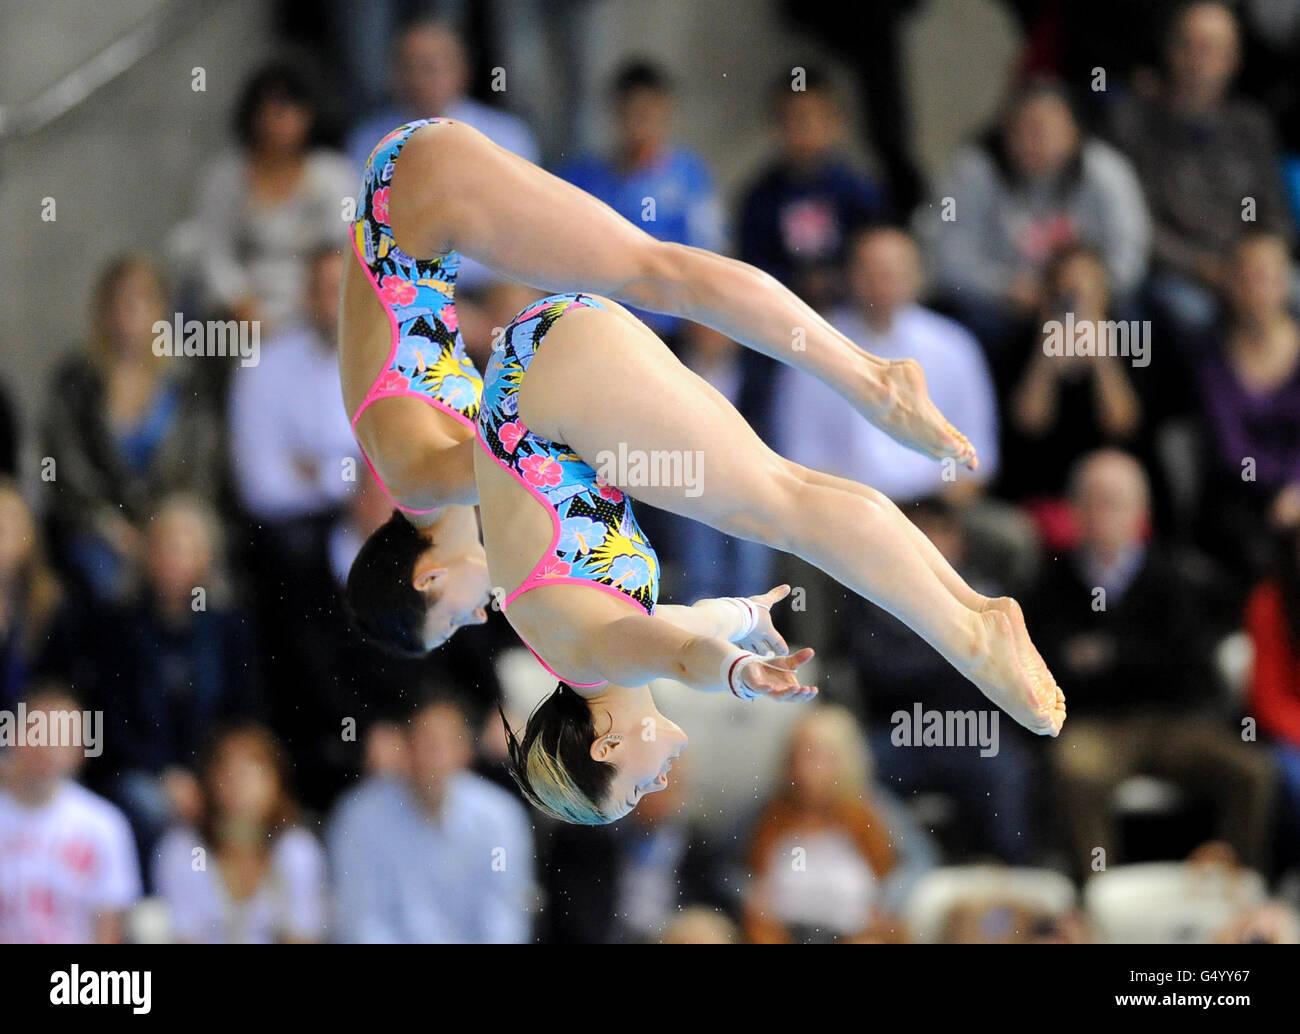 Germany's Nora Subschinski and Christin Steuer in their Women's Synchronised 10m Platform Final during the 18th FINA Visa Diving World Cup at the Aquatics Centre in the Olympic Park, London. Stock Photo